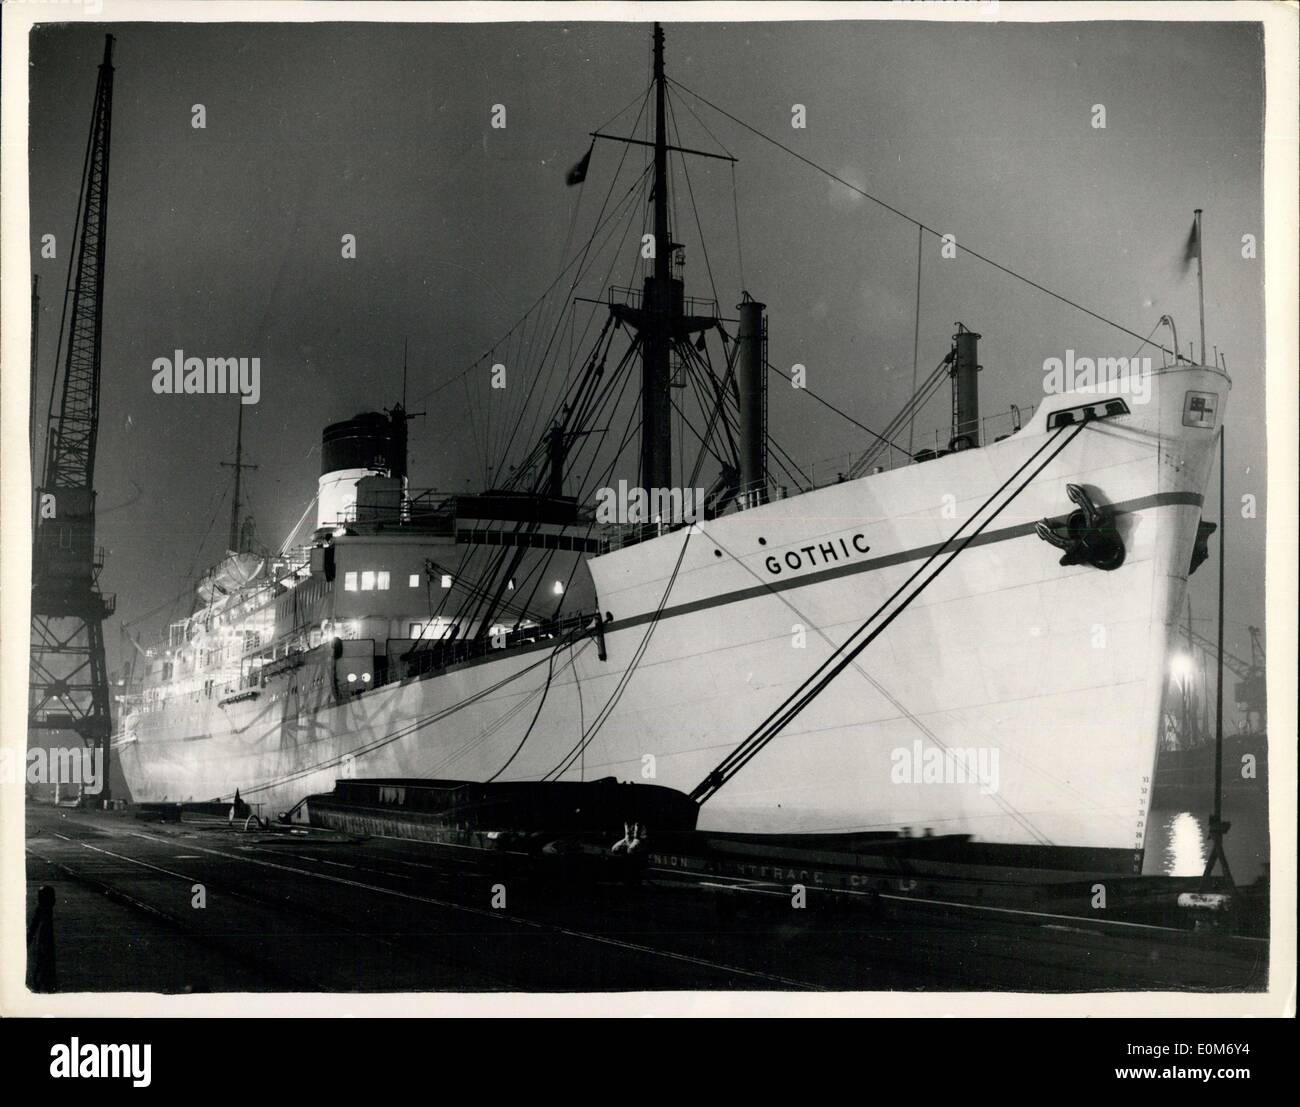 Nov. 10, 1953 - Royal Tour Liner ready for the voyage to Jamaica this evening.: An advance party from the Queen's entourage held a private dinner party on board the liner ''Gothic'', prior to its departure from King George V Dock for Jamaica, this evening. Photo shows the liner ''Gothic'' seen as she lies in King George V Dock before her departure for Jamaica this evening. Stock Photo